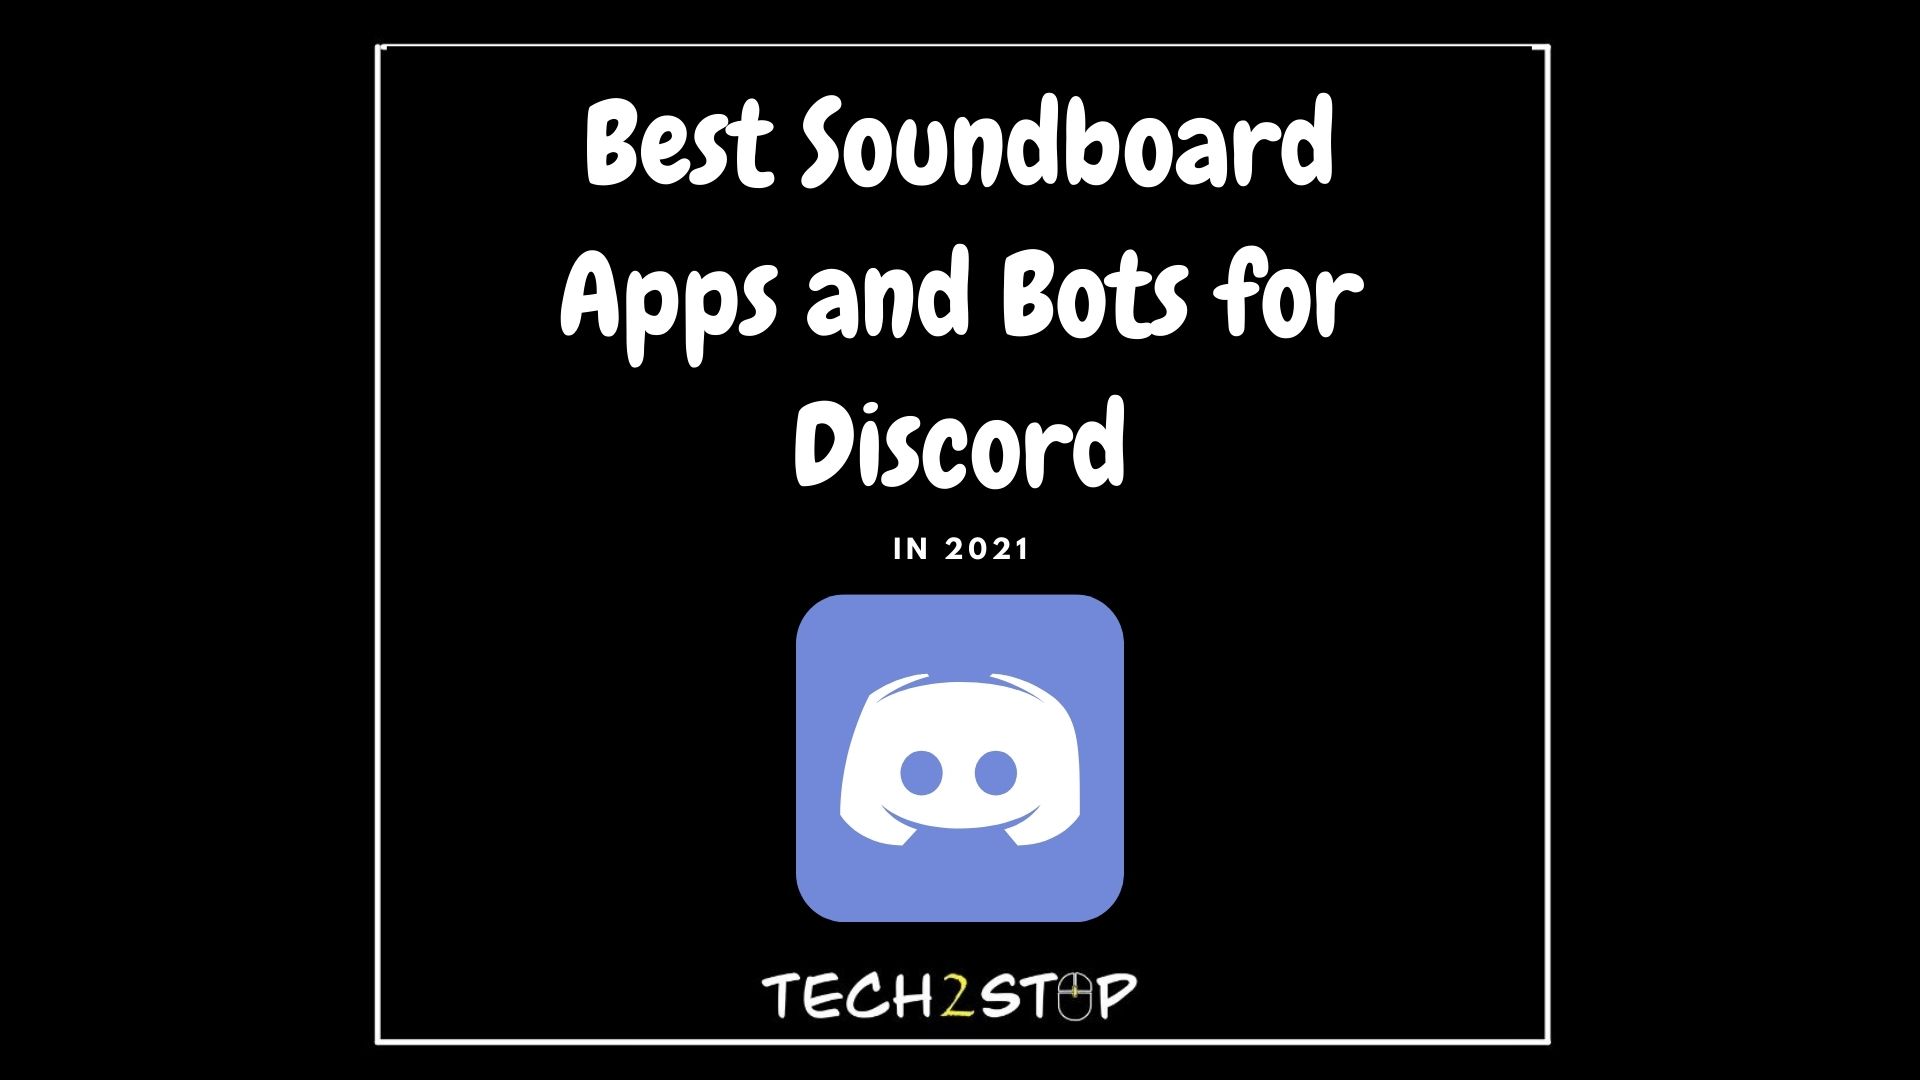 Best Soundboard Apps and Bots for Discord in 2021 - Tech2Stop